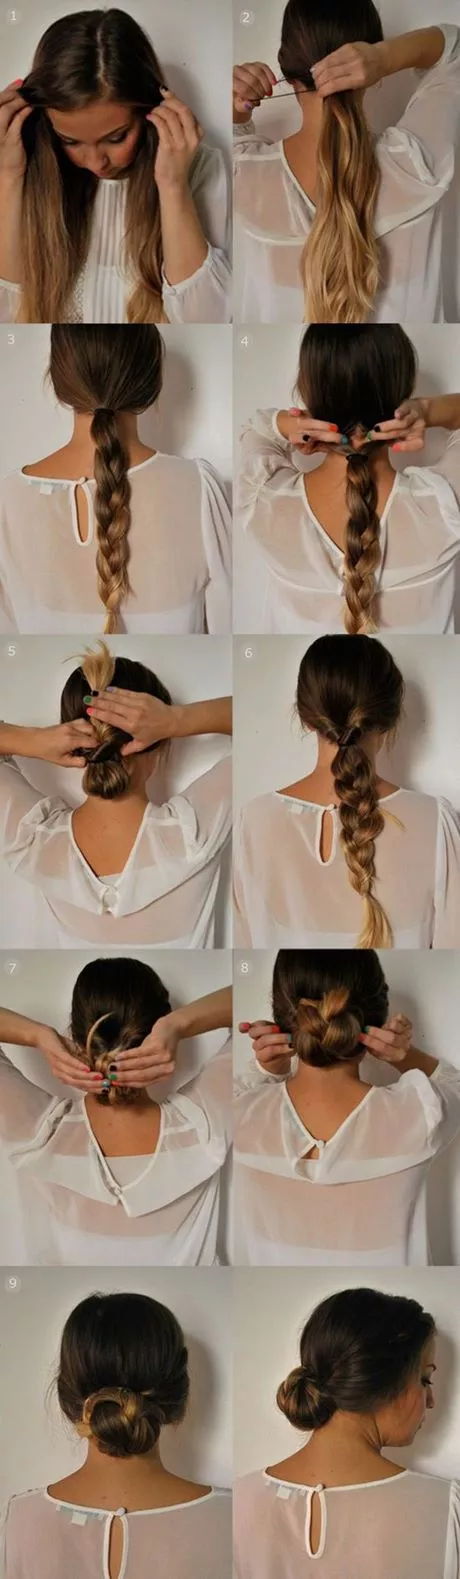 Cool hairstyles that are easy to do cool-hairstyles-that-are-easy-to-do-09_14-7-7